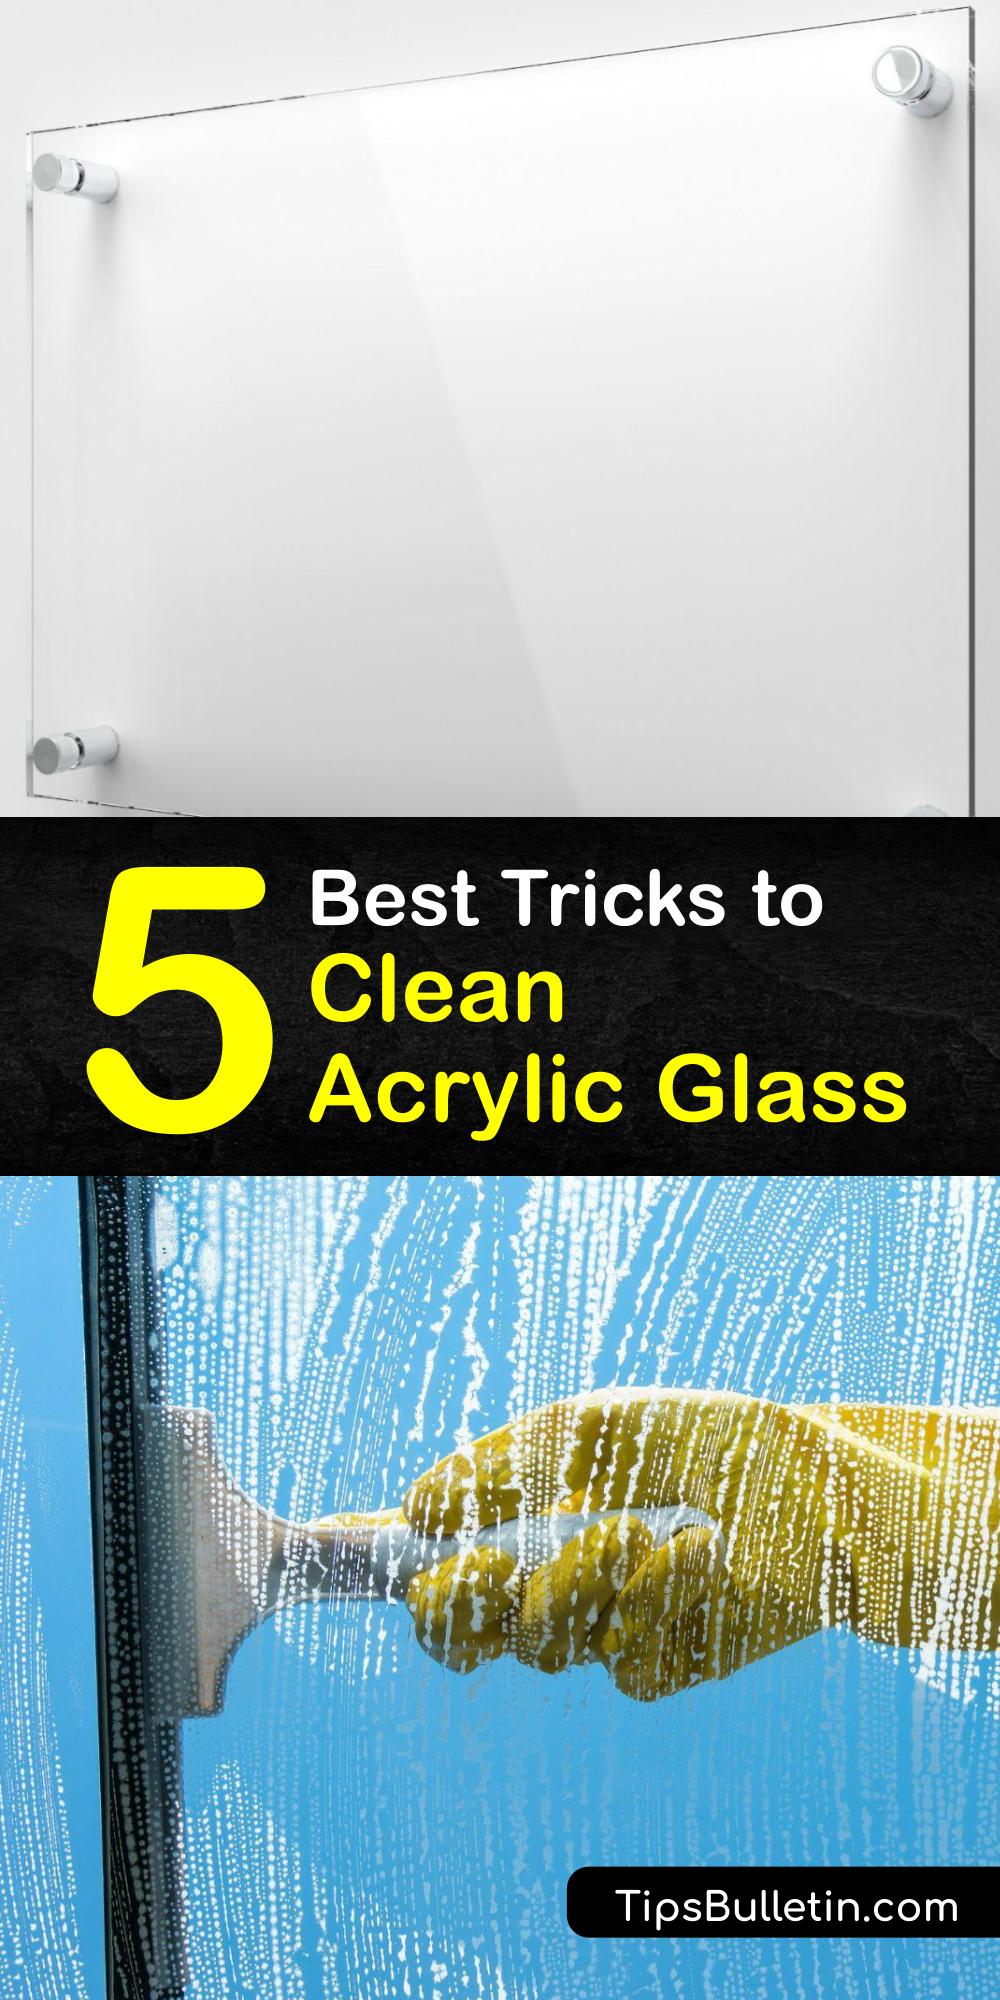 Acrylic Cleaning - Easy Ways to Clean Acrylic Glass